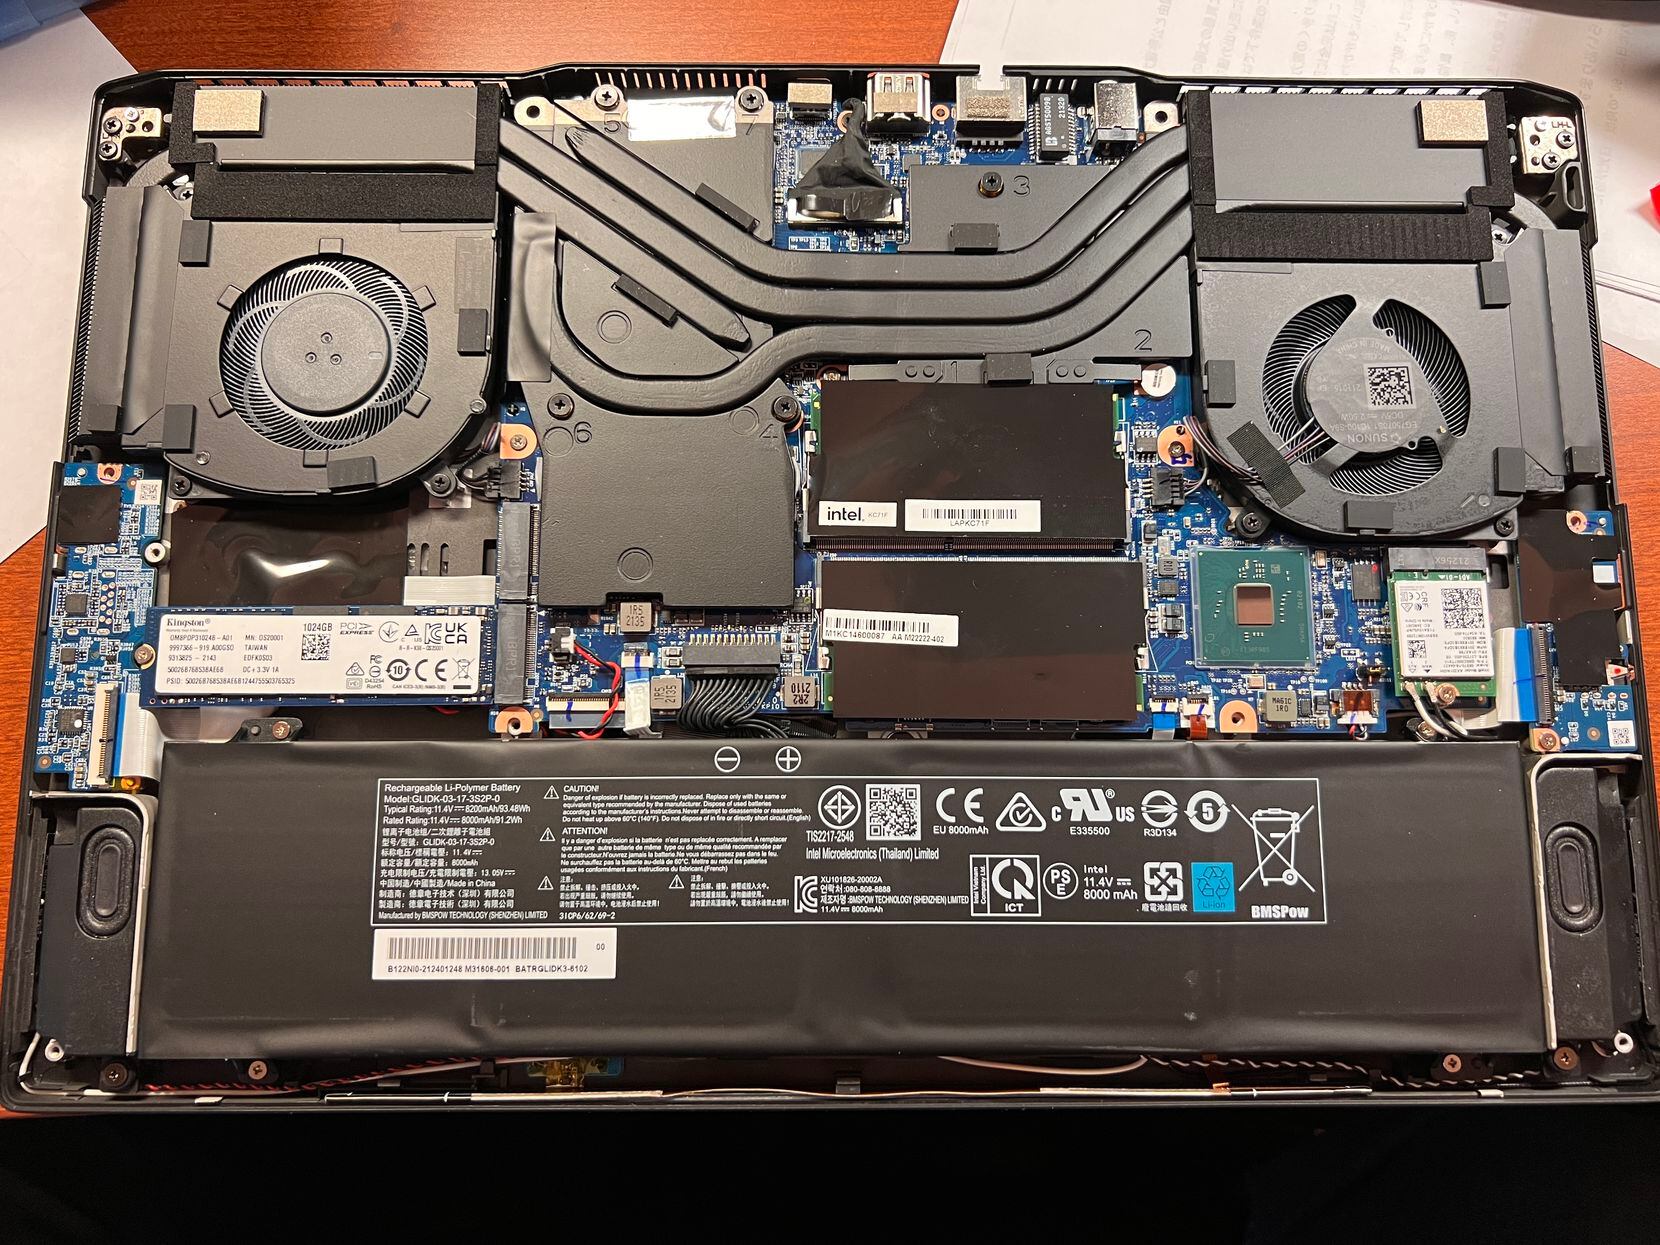 Here's the inside of the Geekom BookFun 11. Note the extra SSD slot under the fan on the...